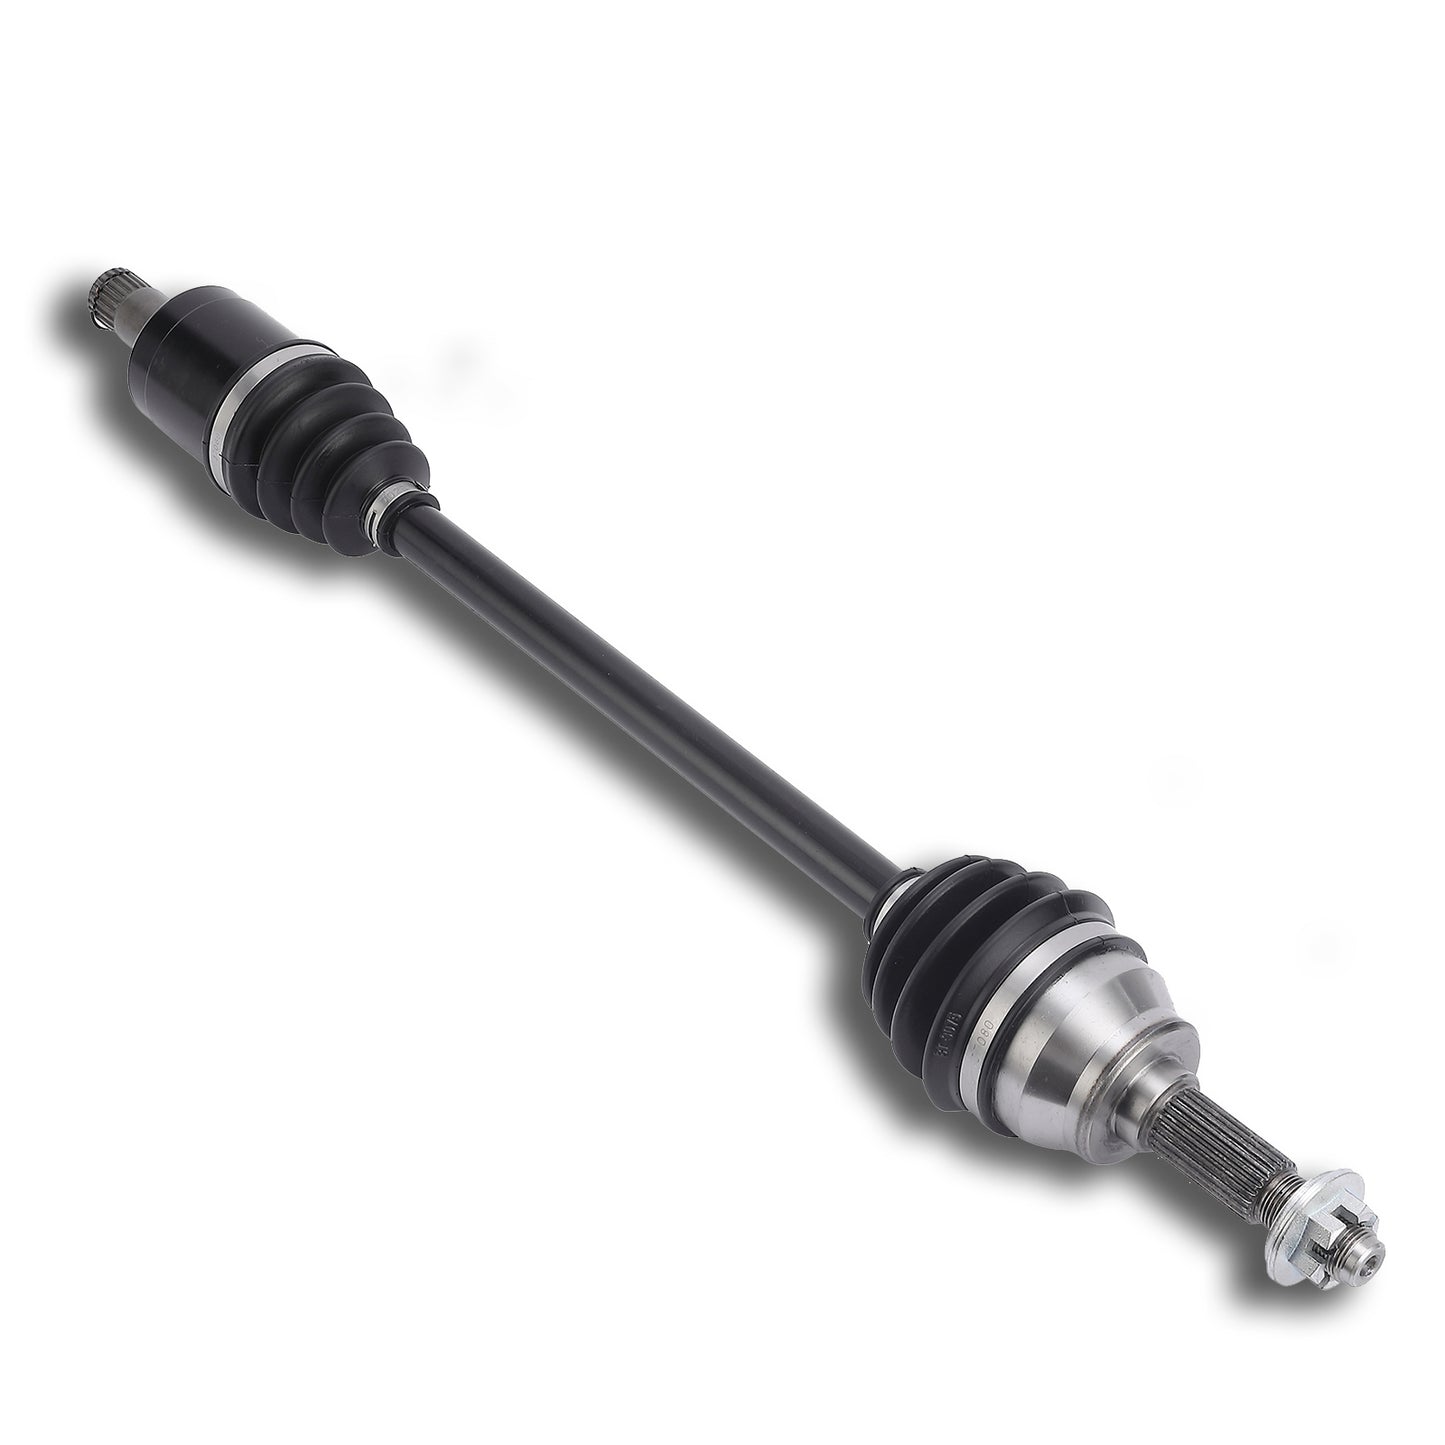 CAM-JD102 Front Left Drive Shaft CV Axle Compatible with JOHN DEERE Gator (2013) XUV 550, 550 S4, 850i BF AM145189 AM145326